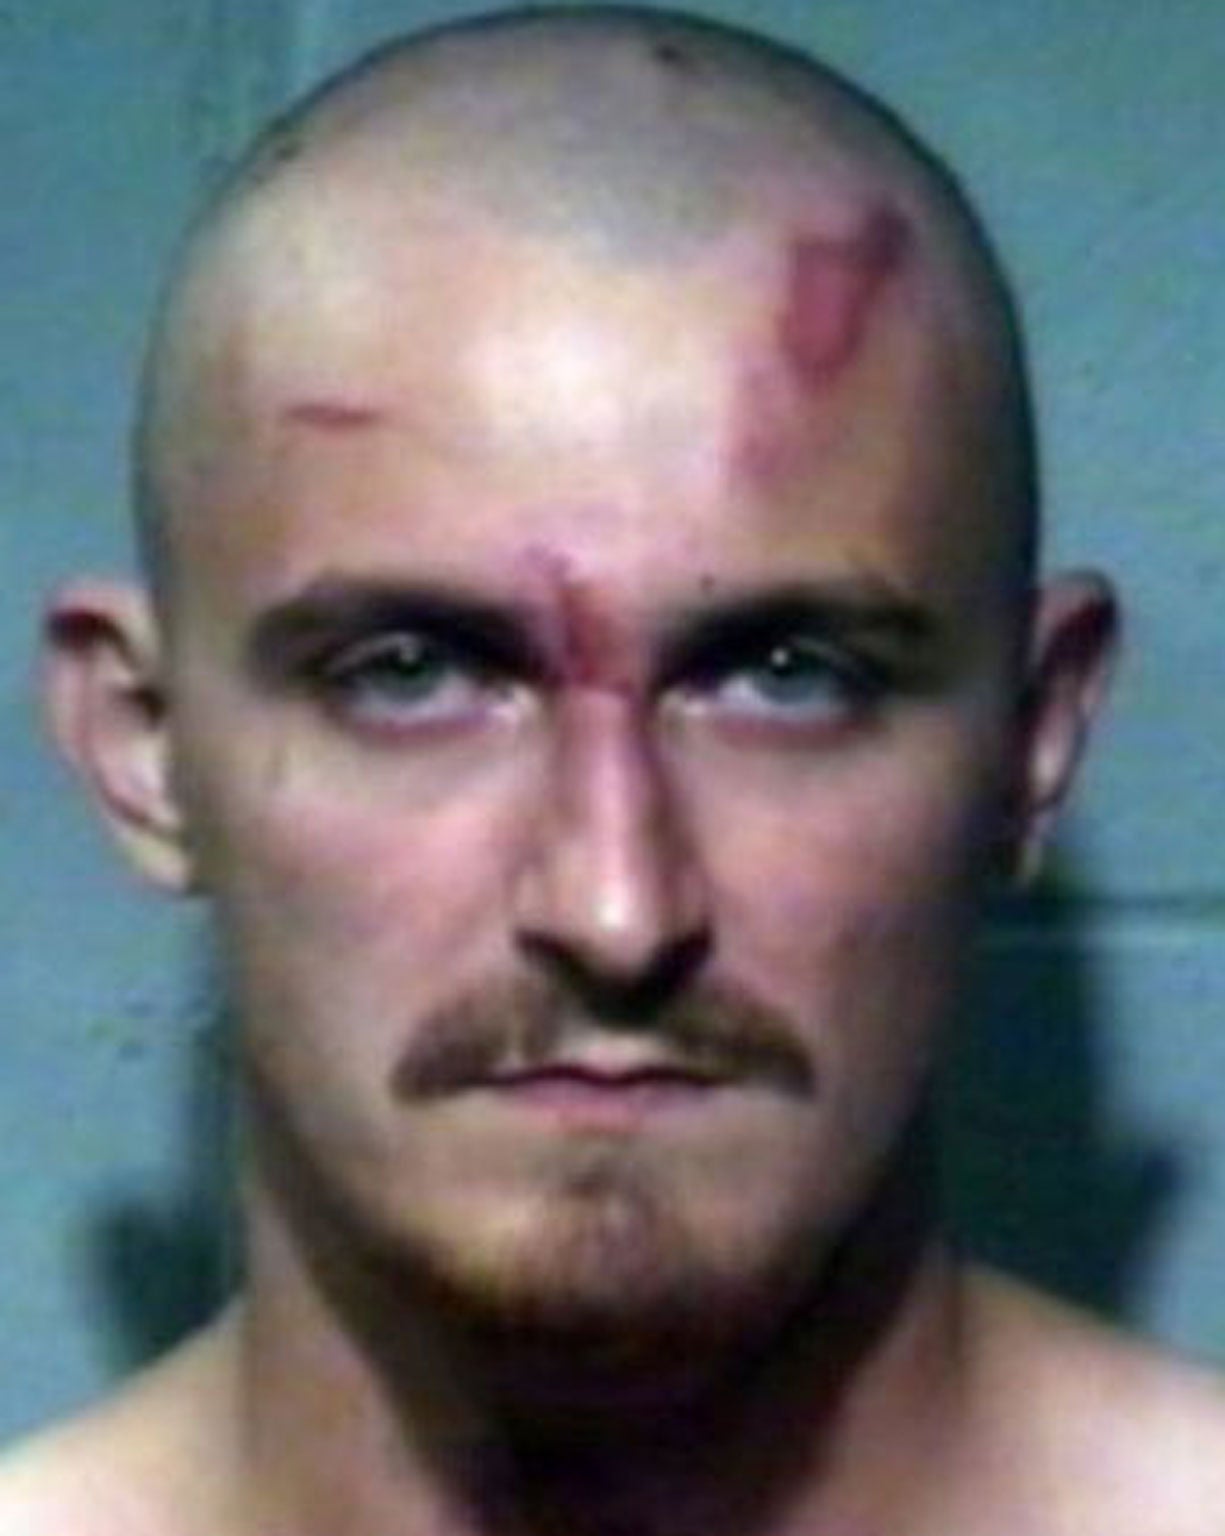 Brion Adam Kriss attempted to escape officers from three different police forces